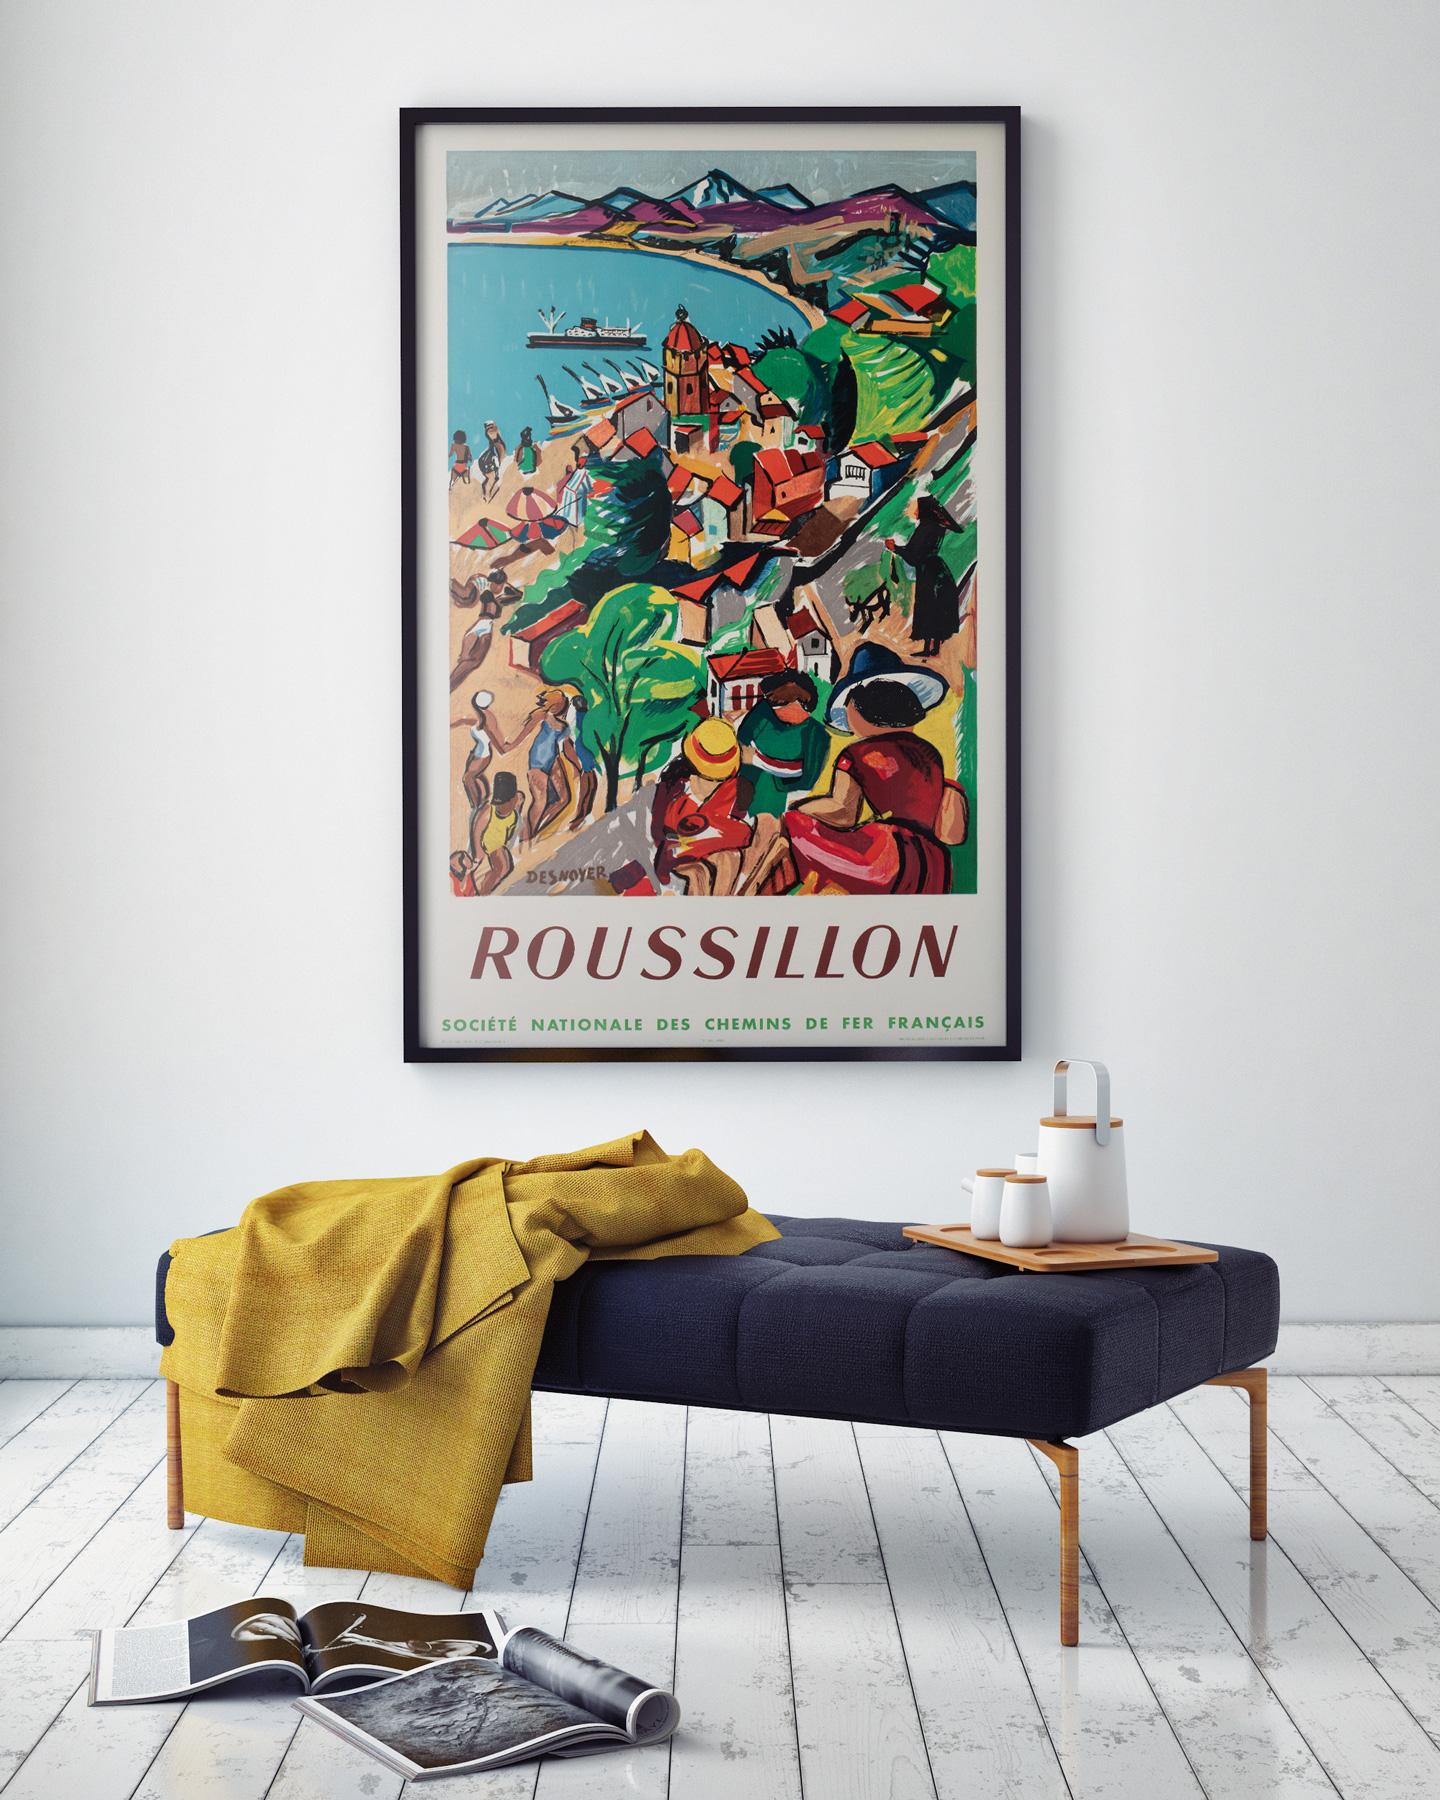 Beautiful original Cote d'Azur  French Travel poster from 1947 designed by Jal. Created for French railways SNCF this poster was part of the post war effort to stimuate tourism for the country. 

Beautiful original 1952 SNCF French Railways Travel